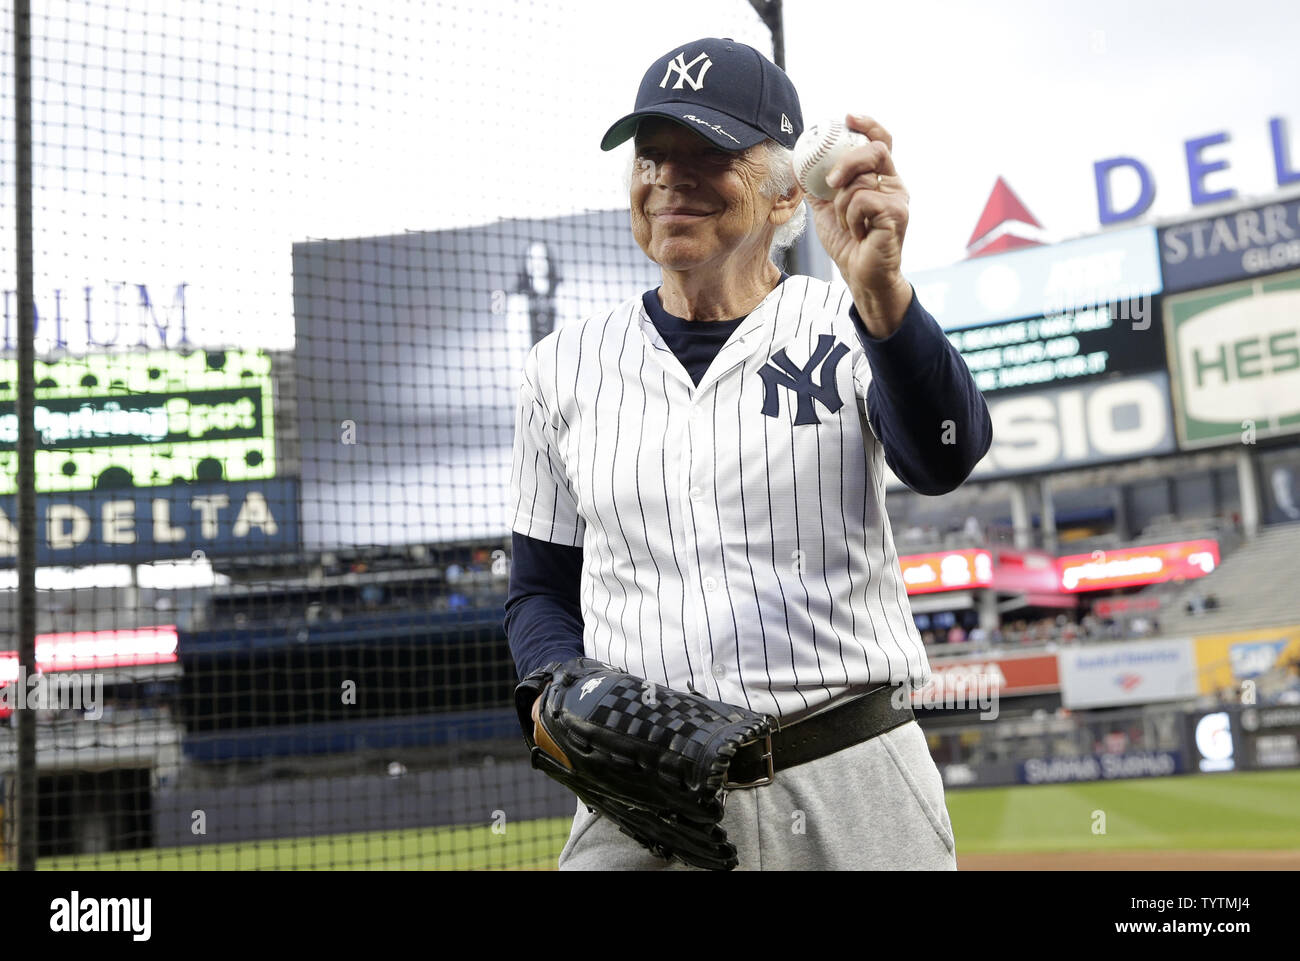 Designer Ralph Lauren stands with a glove and baseball on the field before  the New York Yankees play the Boston Red Sox at Yankee Stadium in New York  City on September 20,